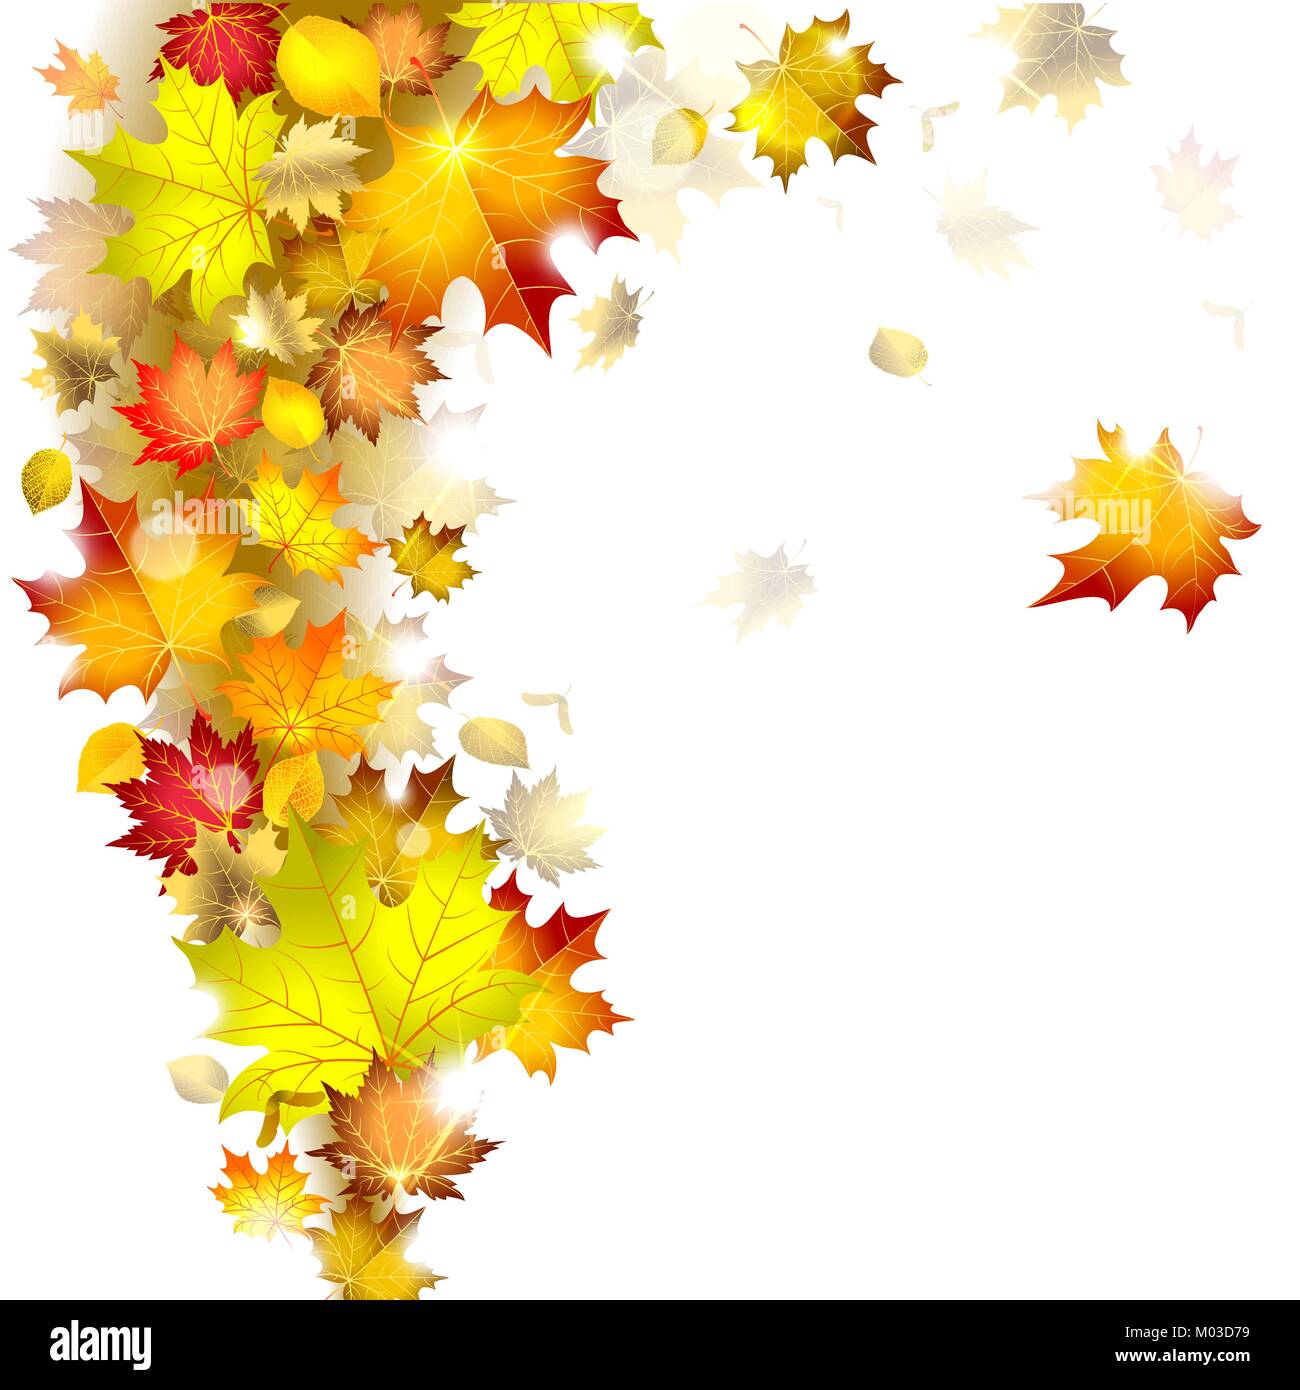 whirlwind of falling autumn leaves Stock Vector